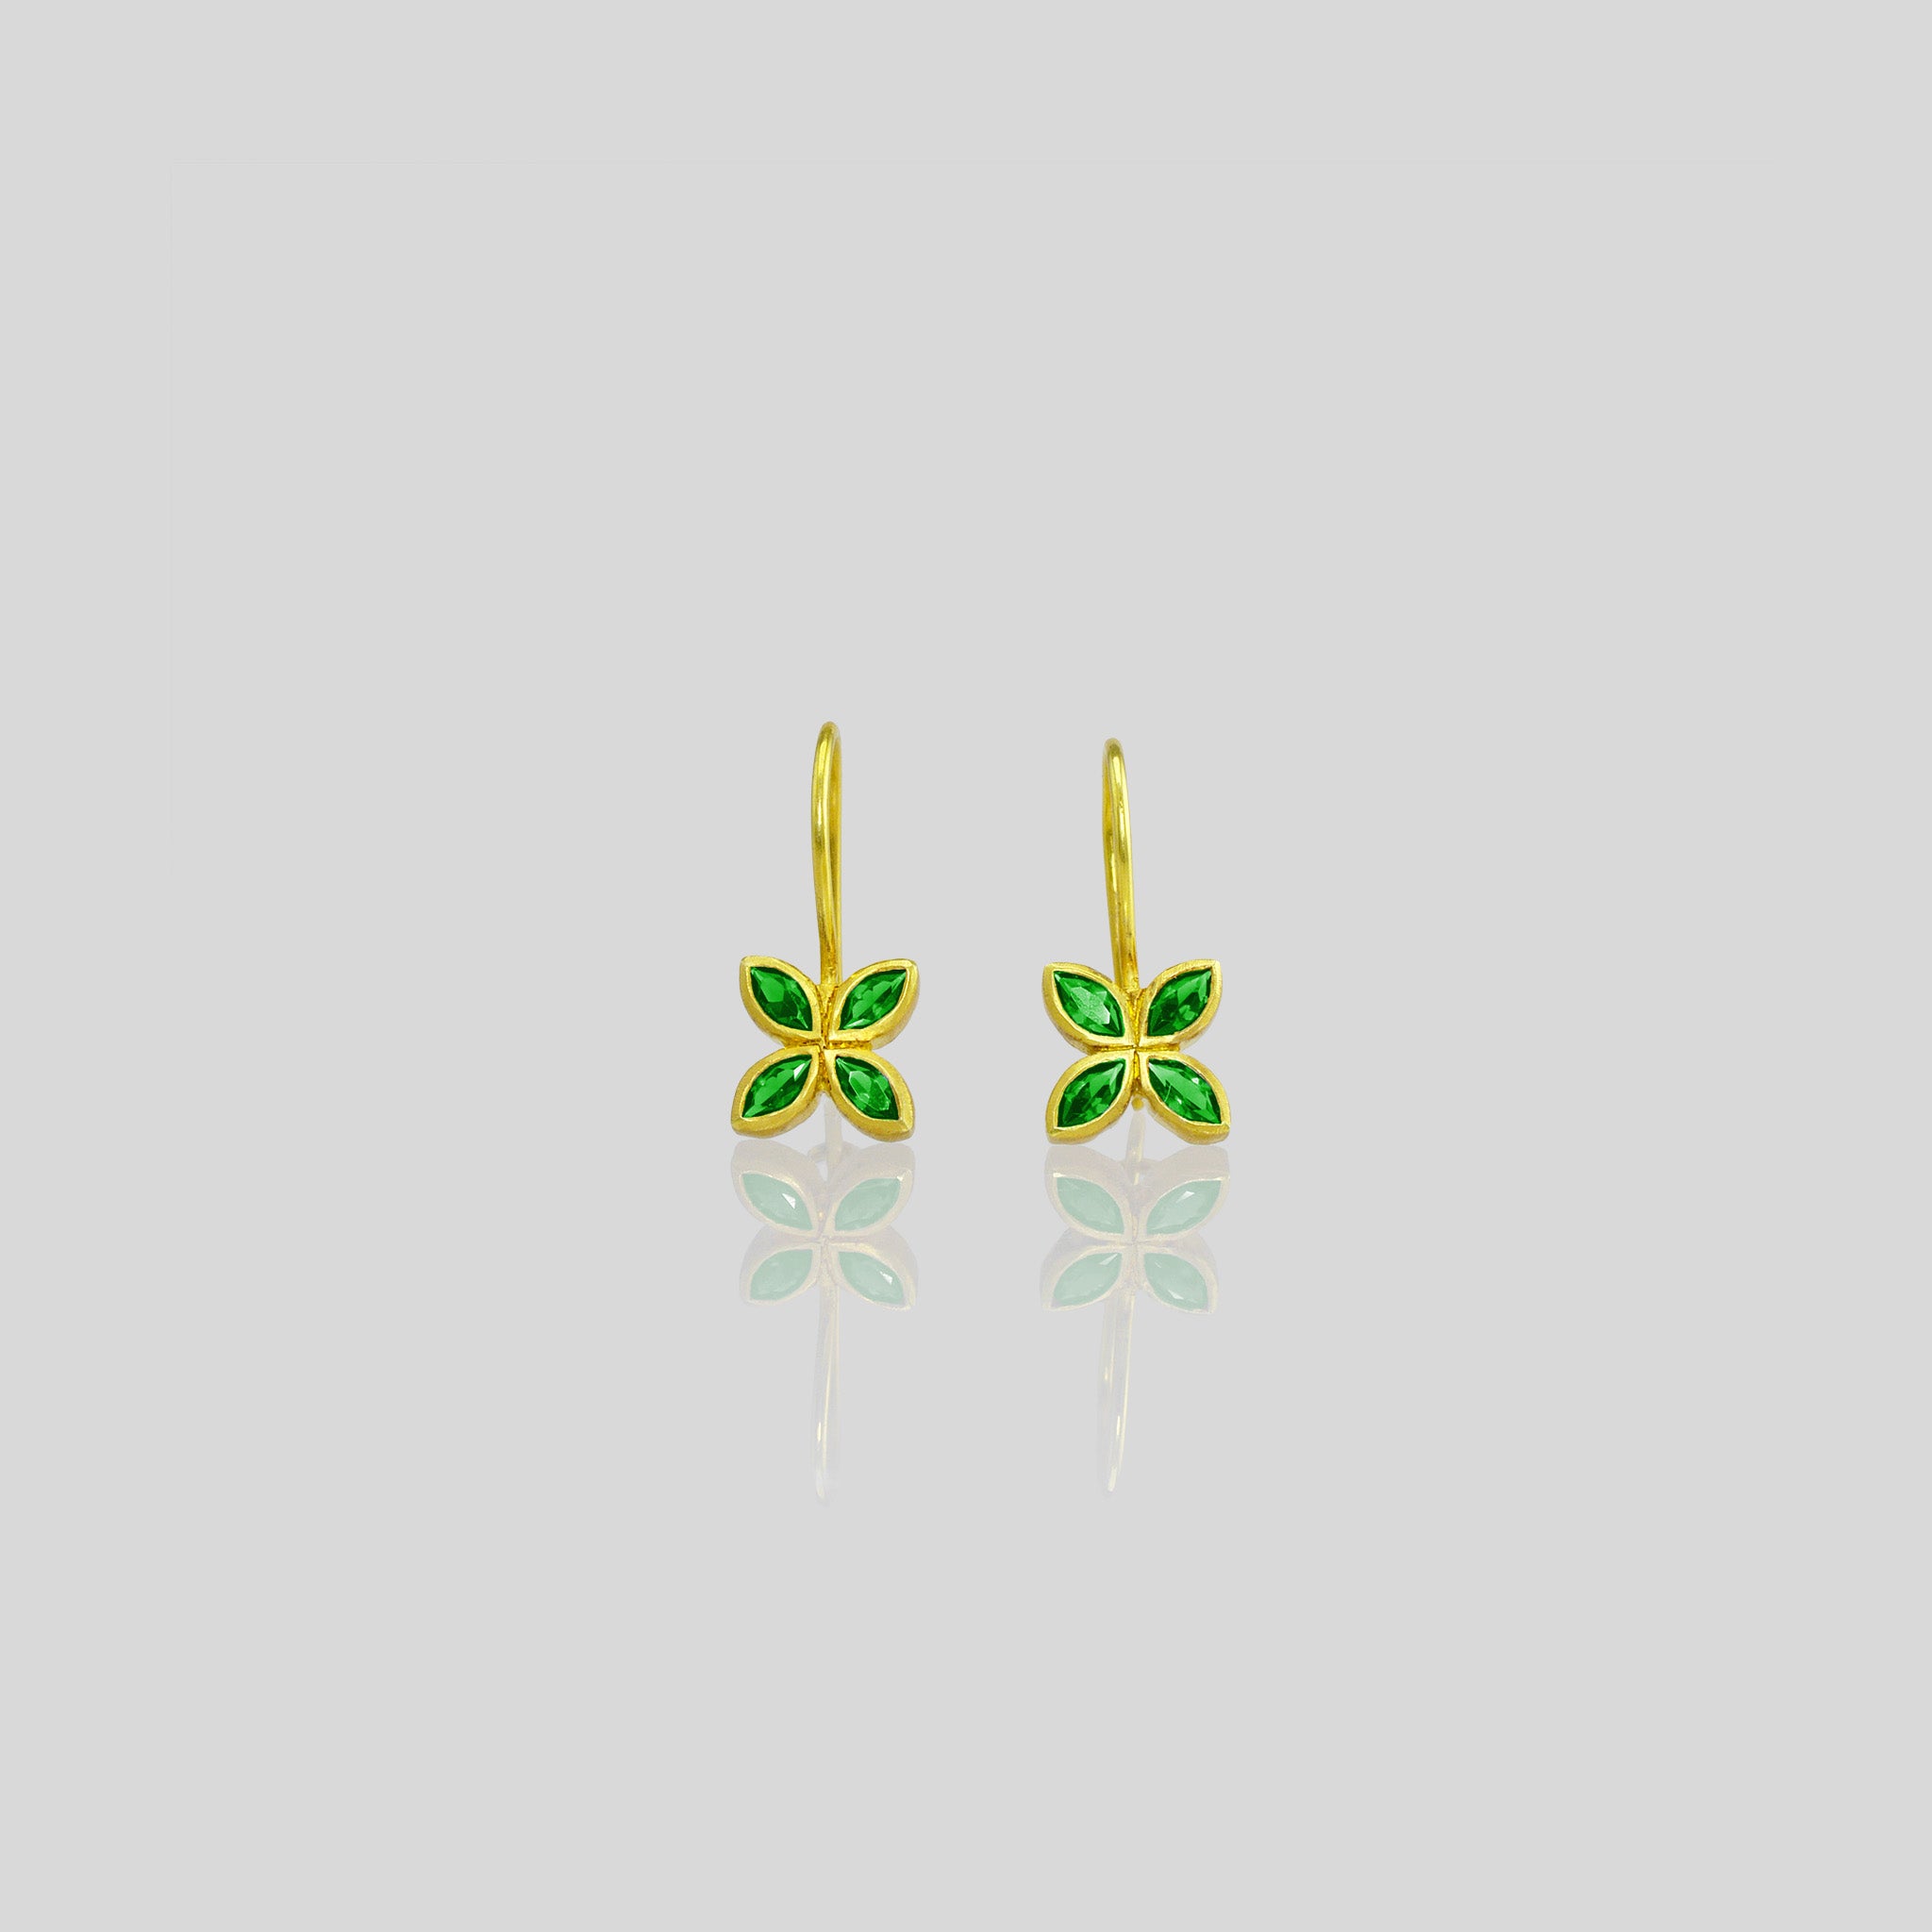 Dazzling Emerald flower earrings, crafted from 4 marquise gemstones. Lightweight, colorful and vibrant.